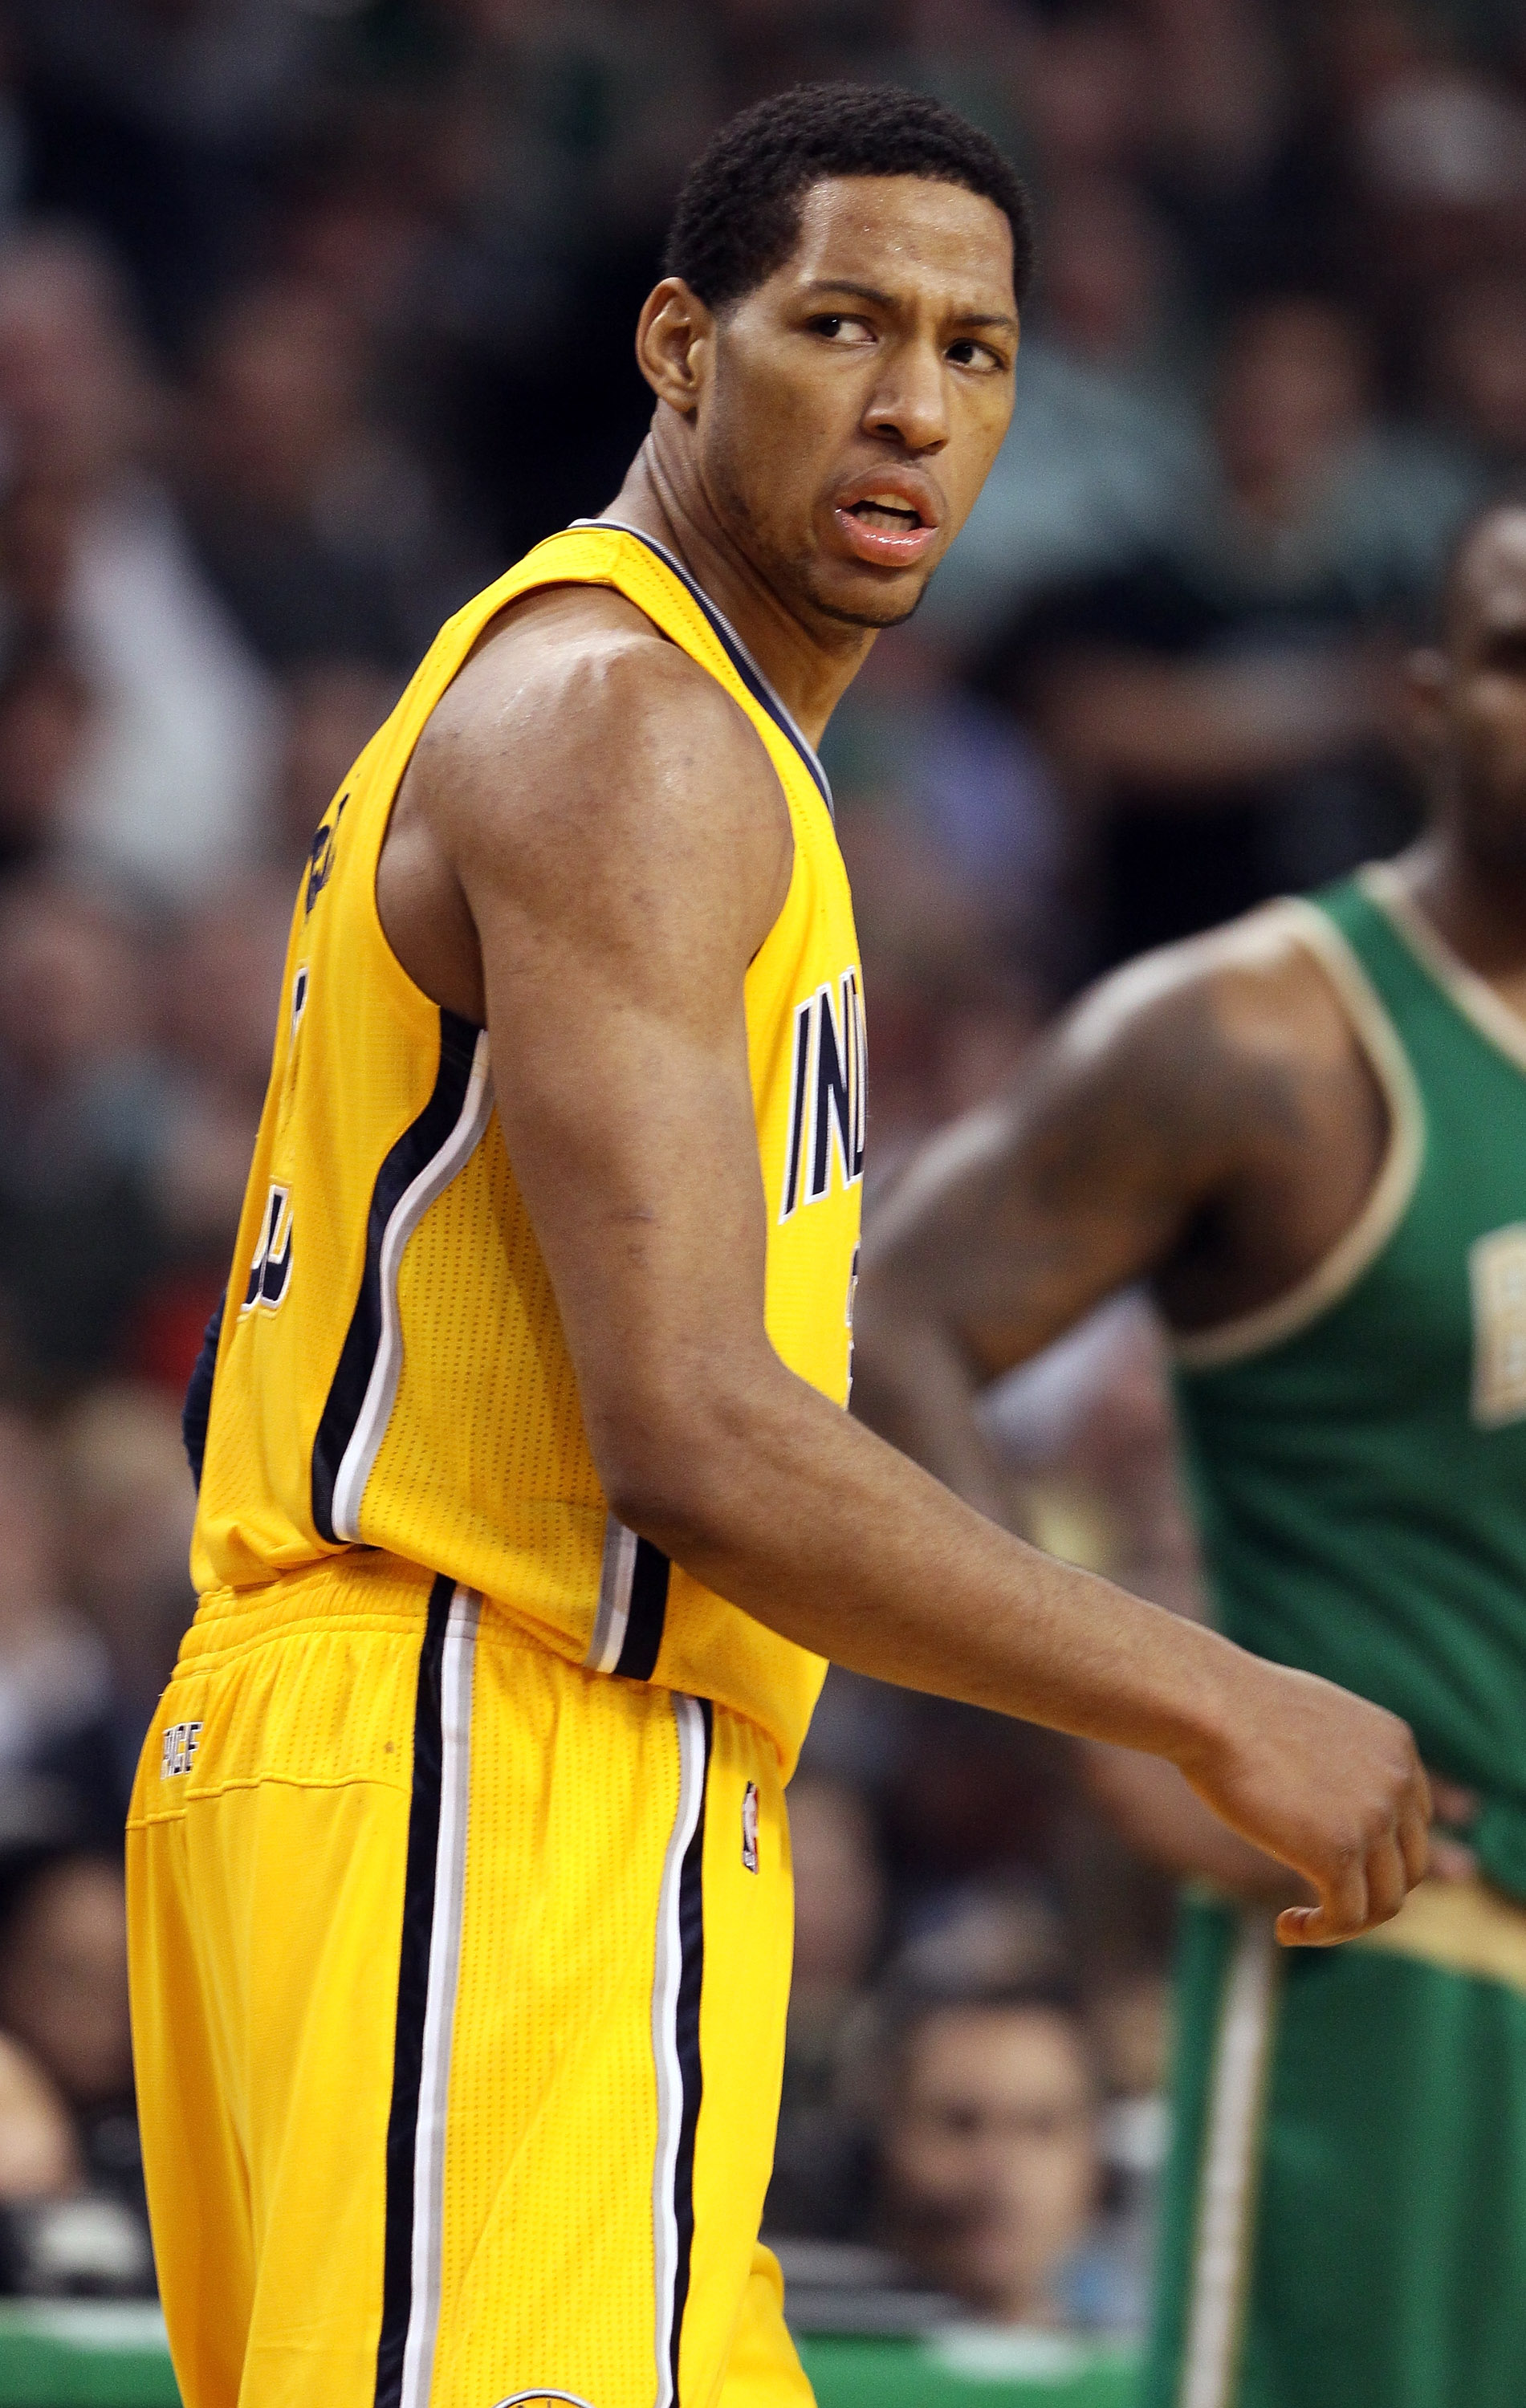 BOSTON, MA - MARCH 16:  Danny Granger #33 of the Indiana Pacers reacts after he is called for a technical foul in the second half against the Boston Celtics on March 16, 2011 at the TD Garden in Boston, Massachusetts. The Celtics defeated the Indiana Pace